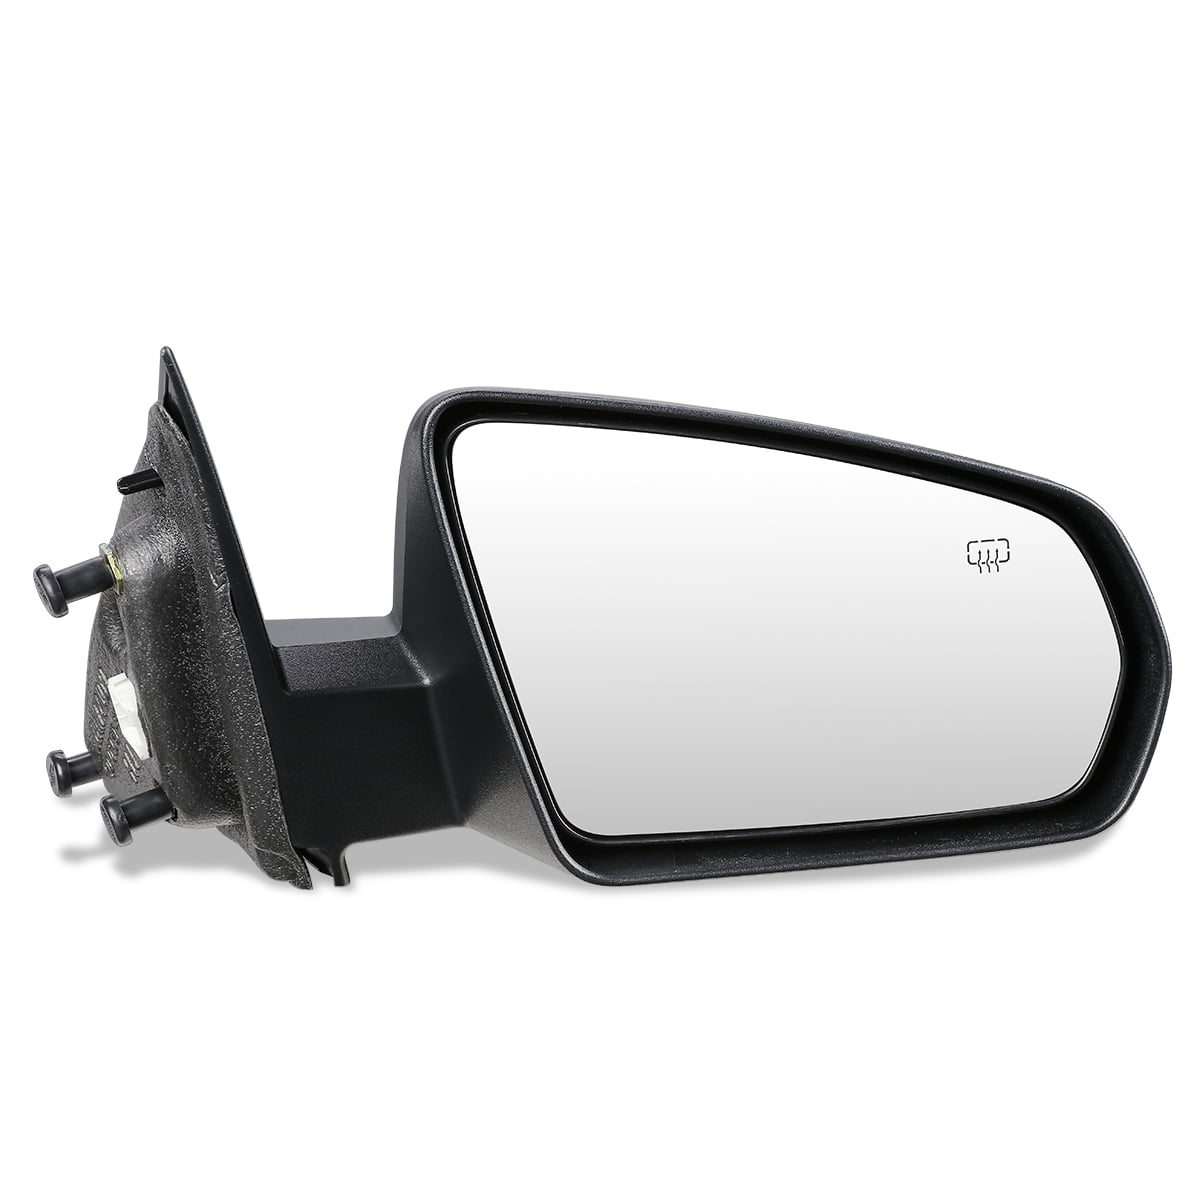 FOR 04-08 MITSUBISHI GALANT PAIR OE STYLE POWERED ADJUSTMENT SIDE DOOR MIRROR 